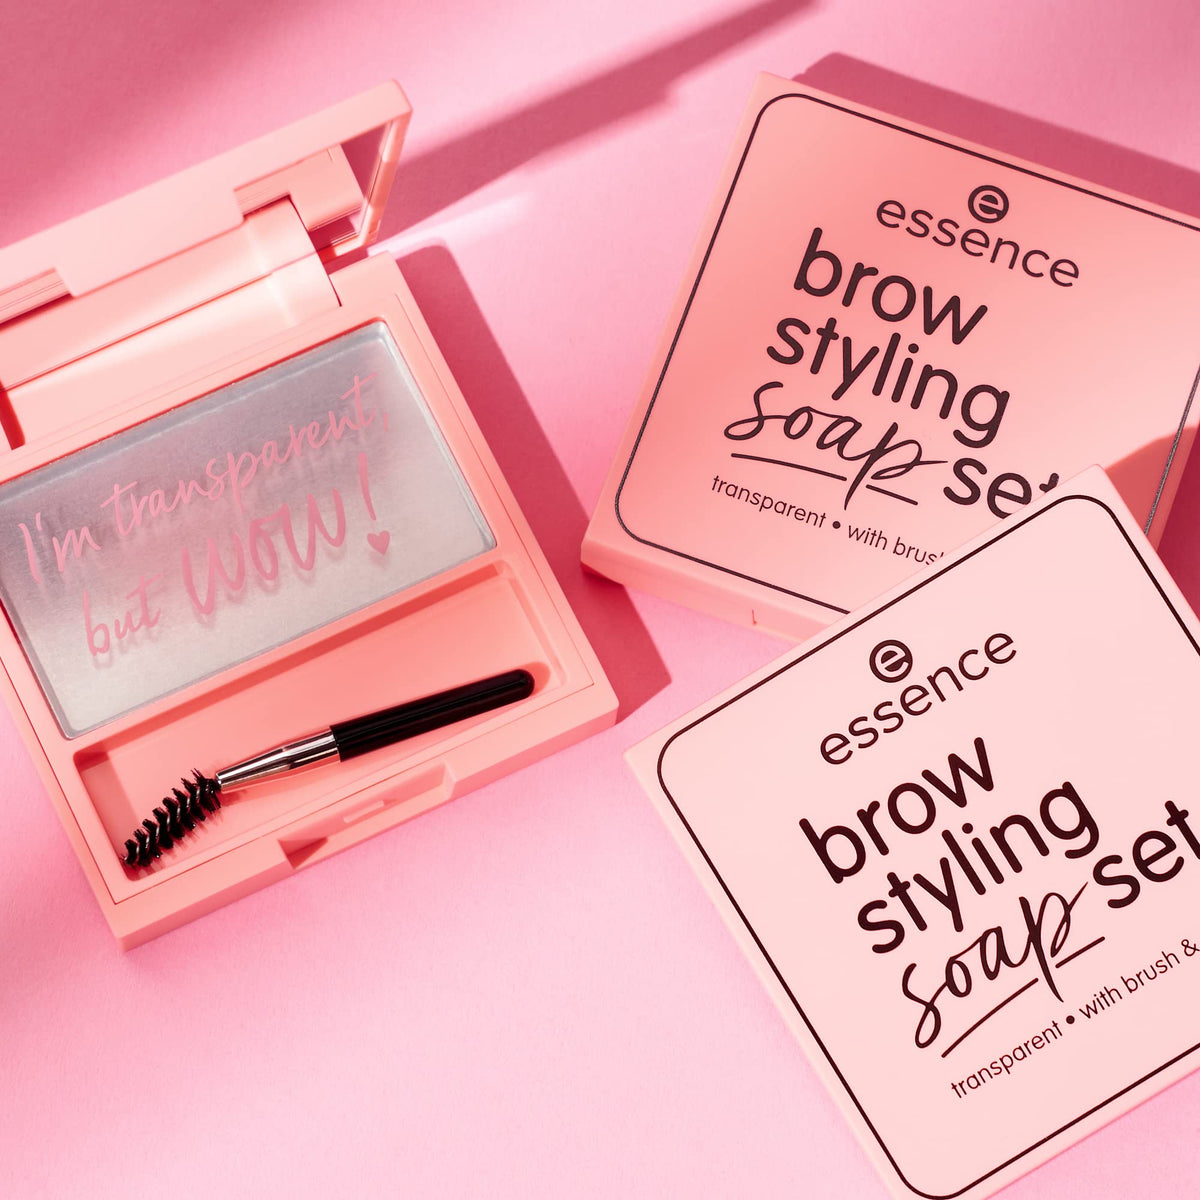 Essence Brow Styling Soap , Transparent , With Brush & Mirror